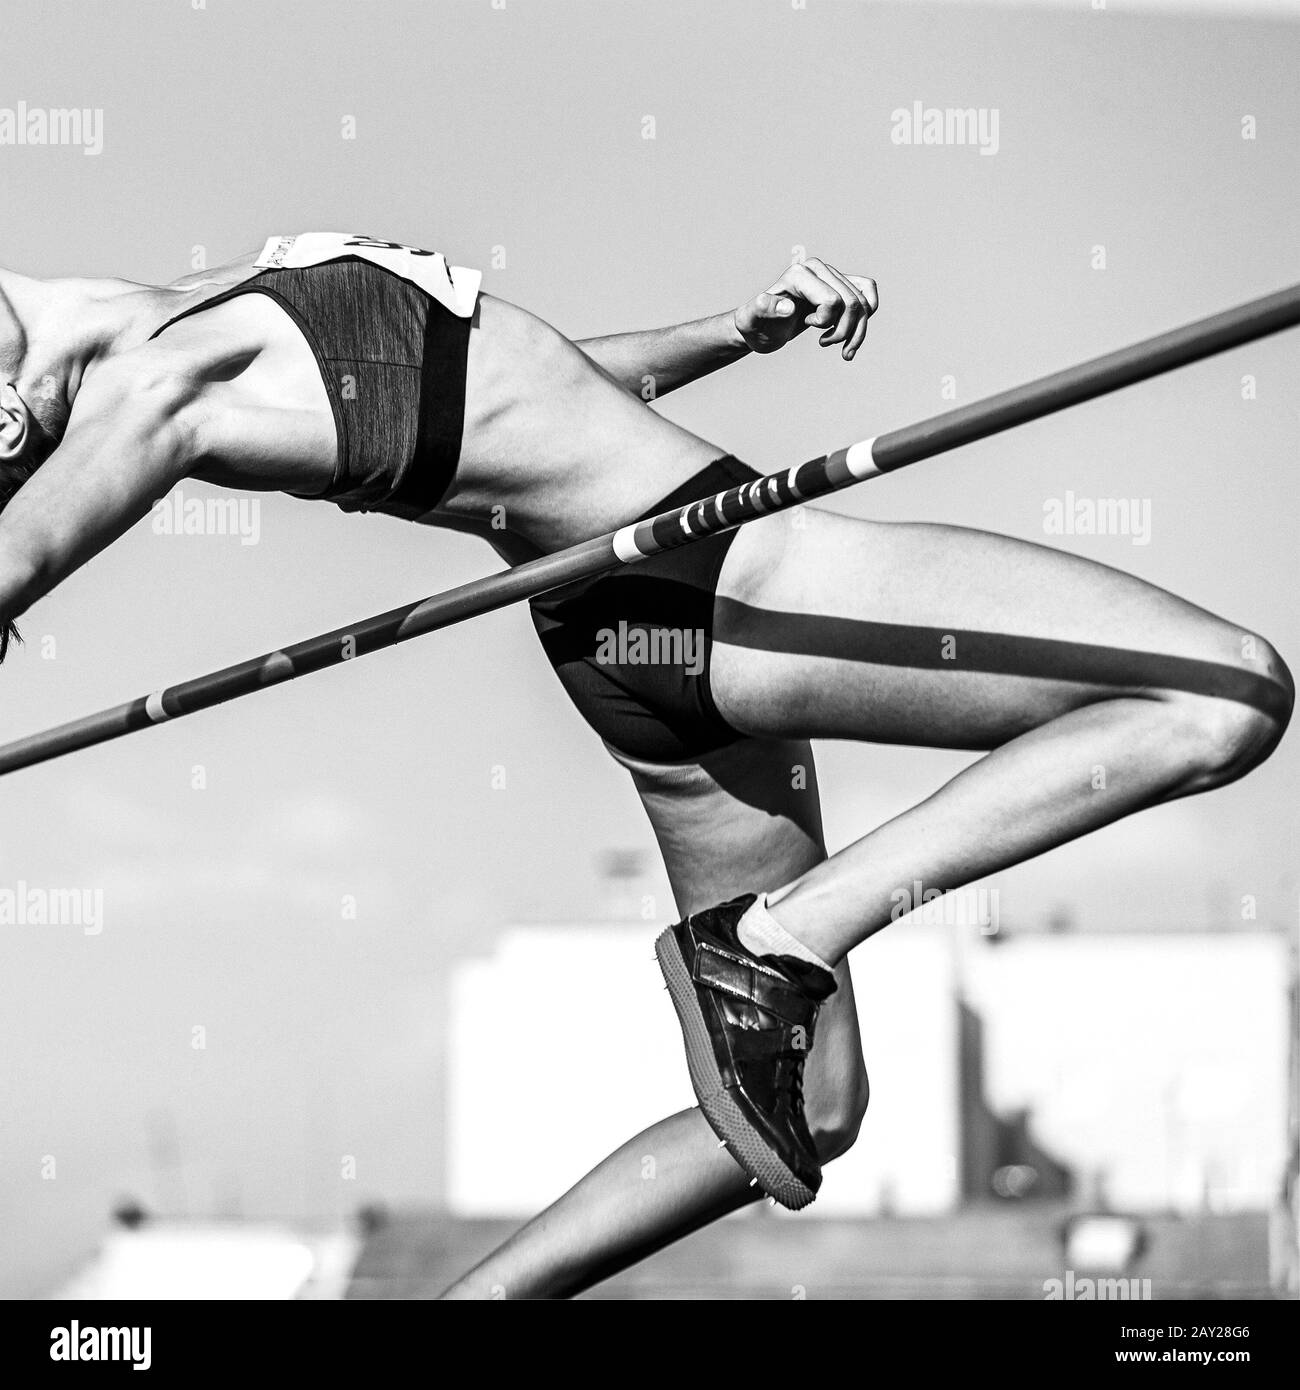 high jump in athletics women athlete black and white image Stock Photo